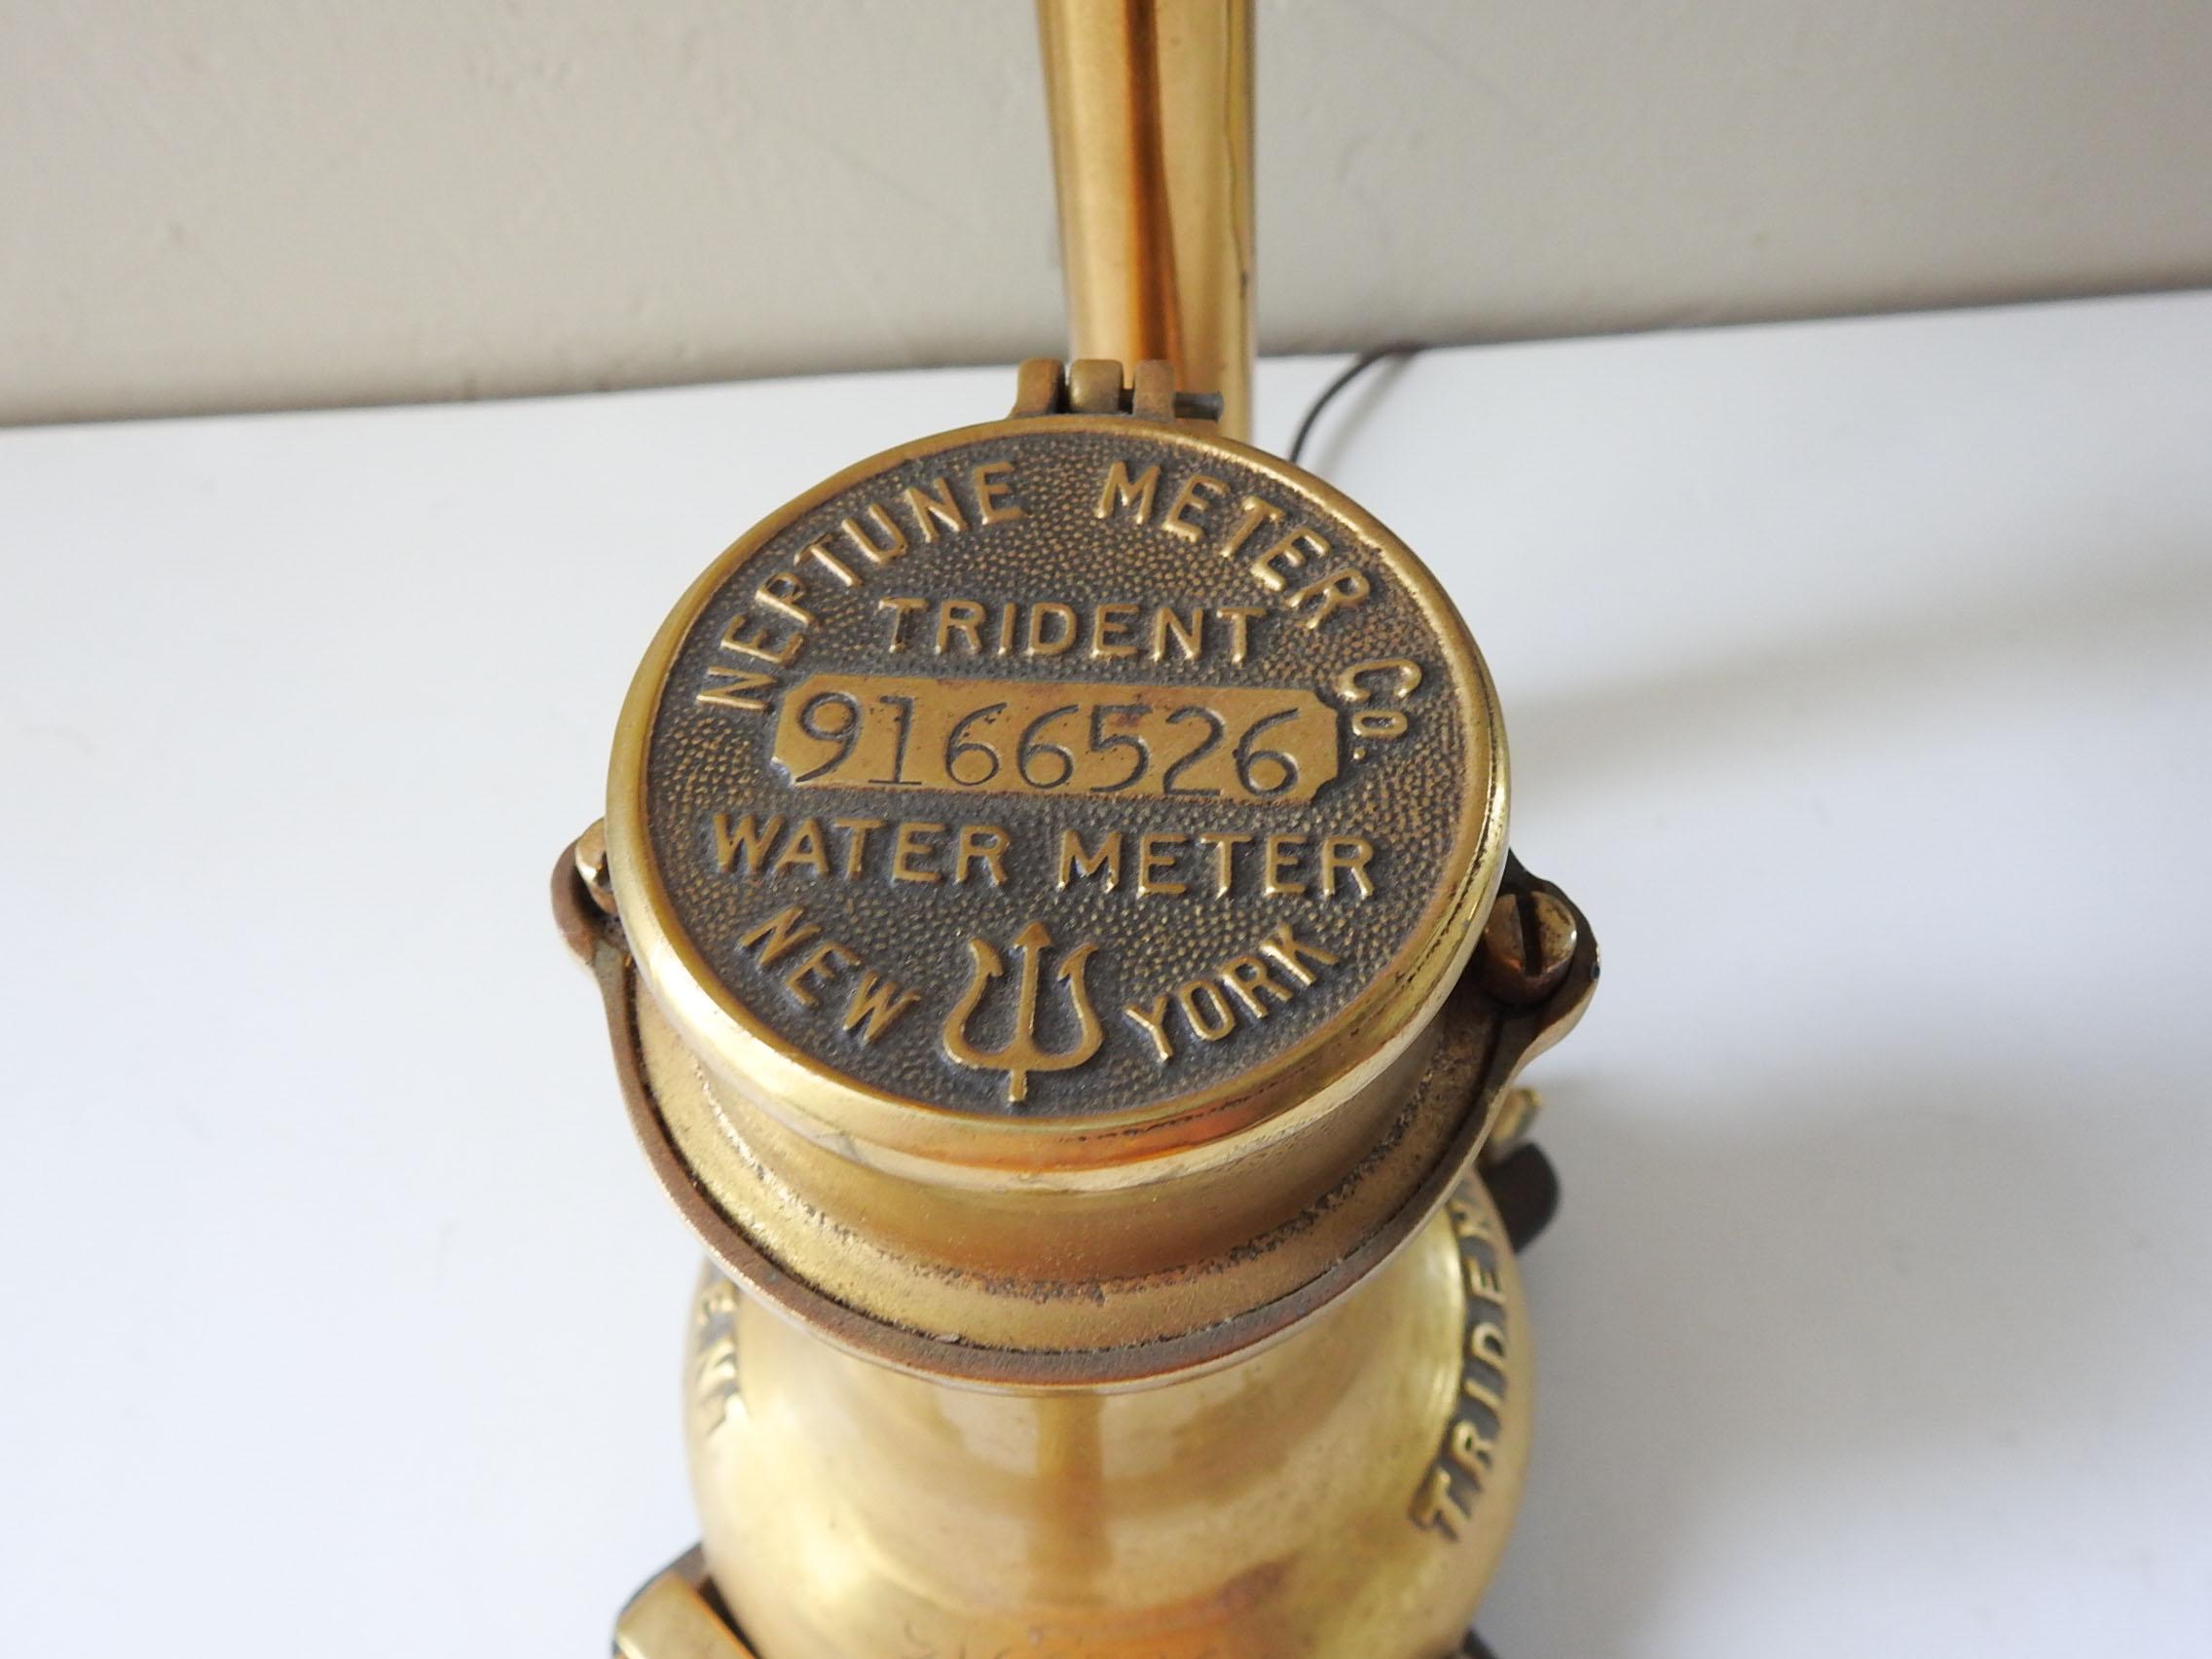 Table lamp made from antique brass water meter and pipe.  New York Neptune Trident Meter, standard light bulb, comes with Edison style blub.  Has a rather short cord about 40